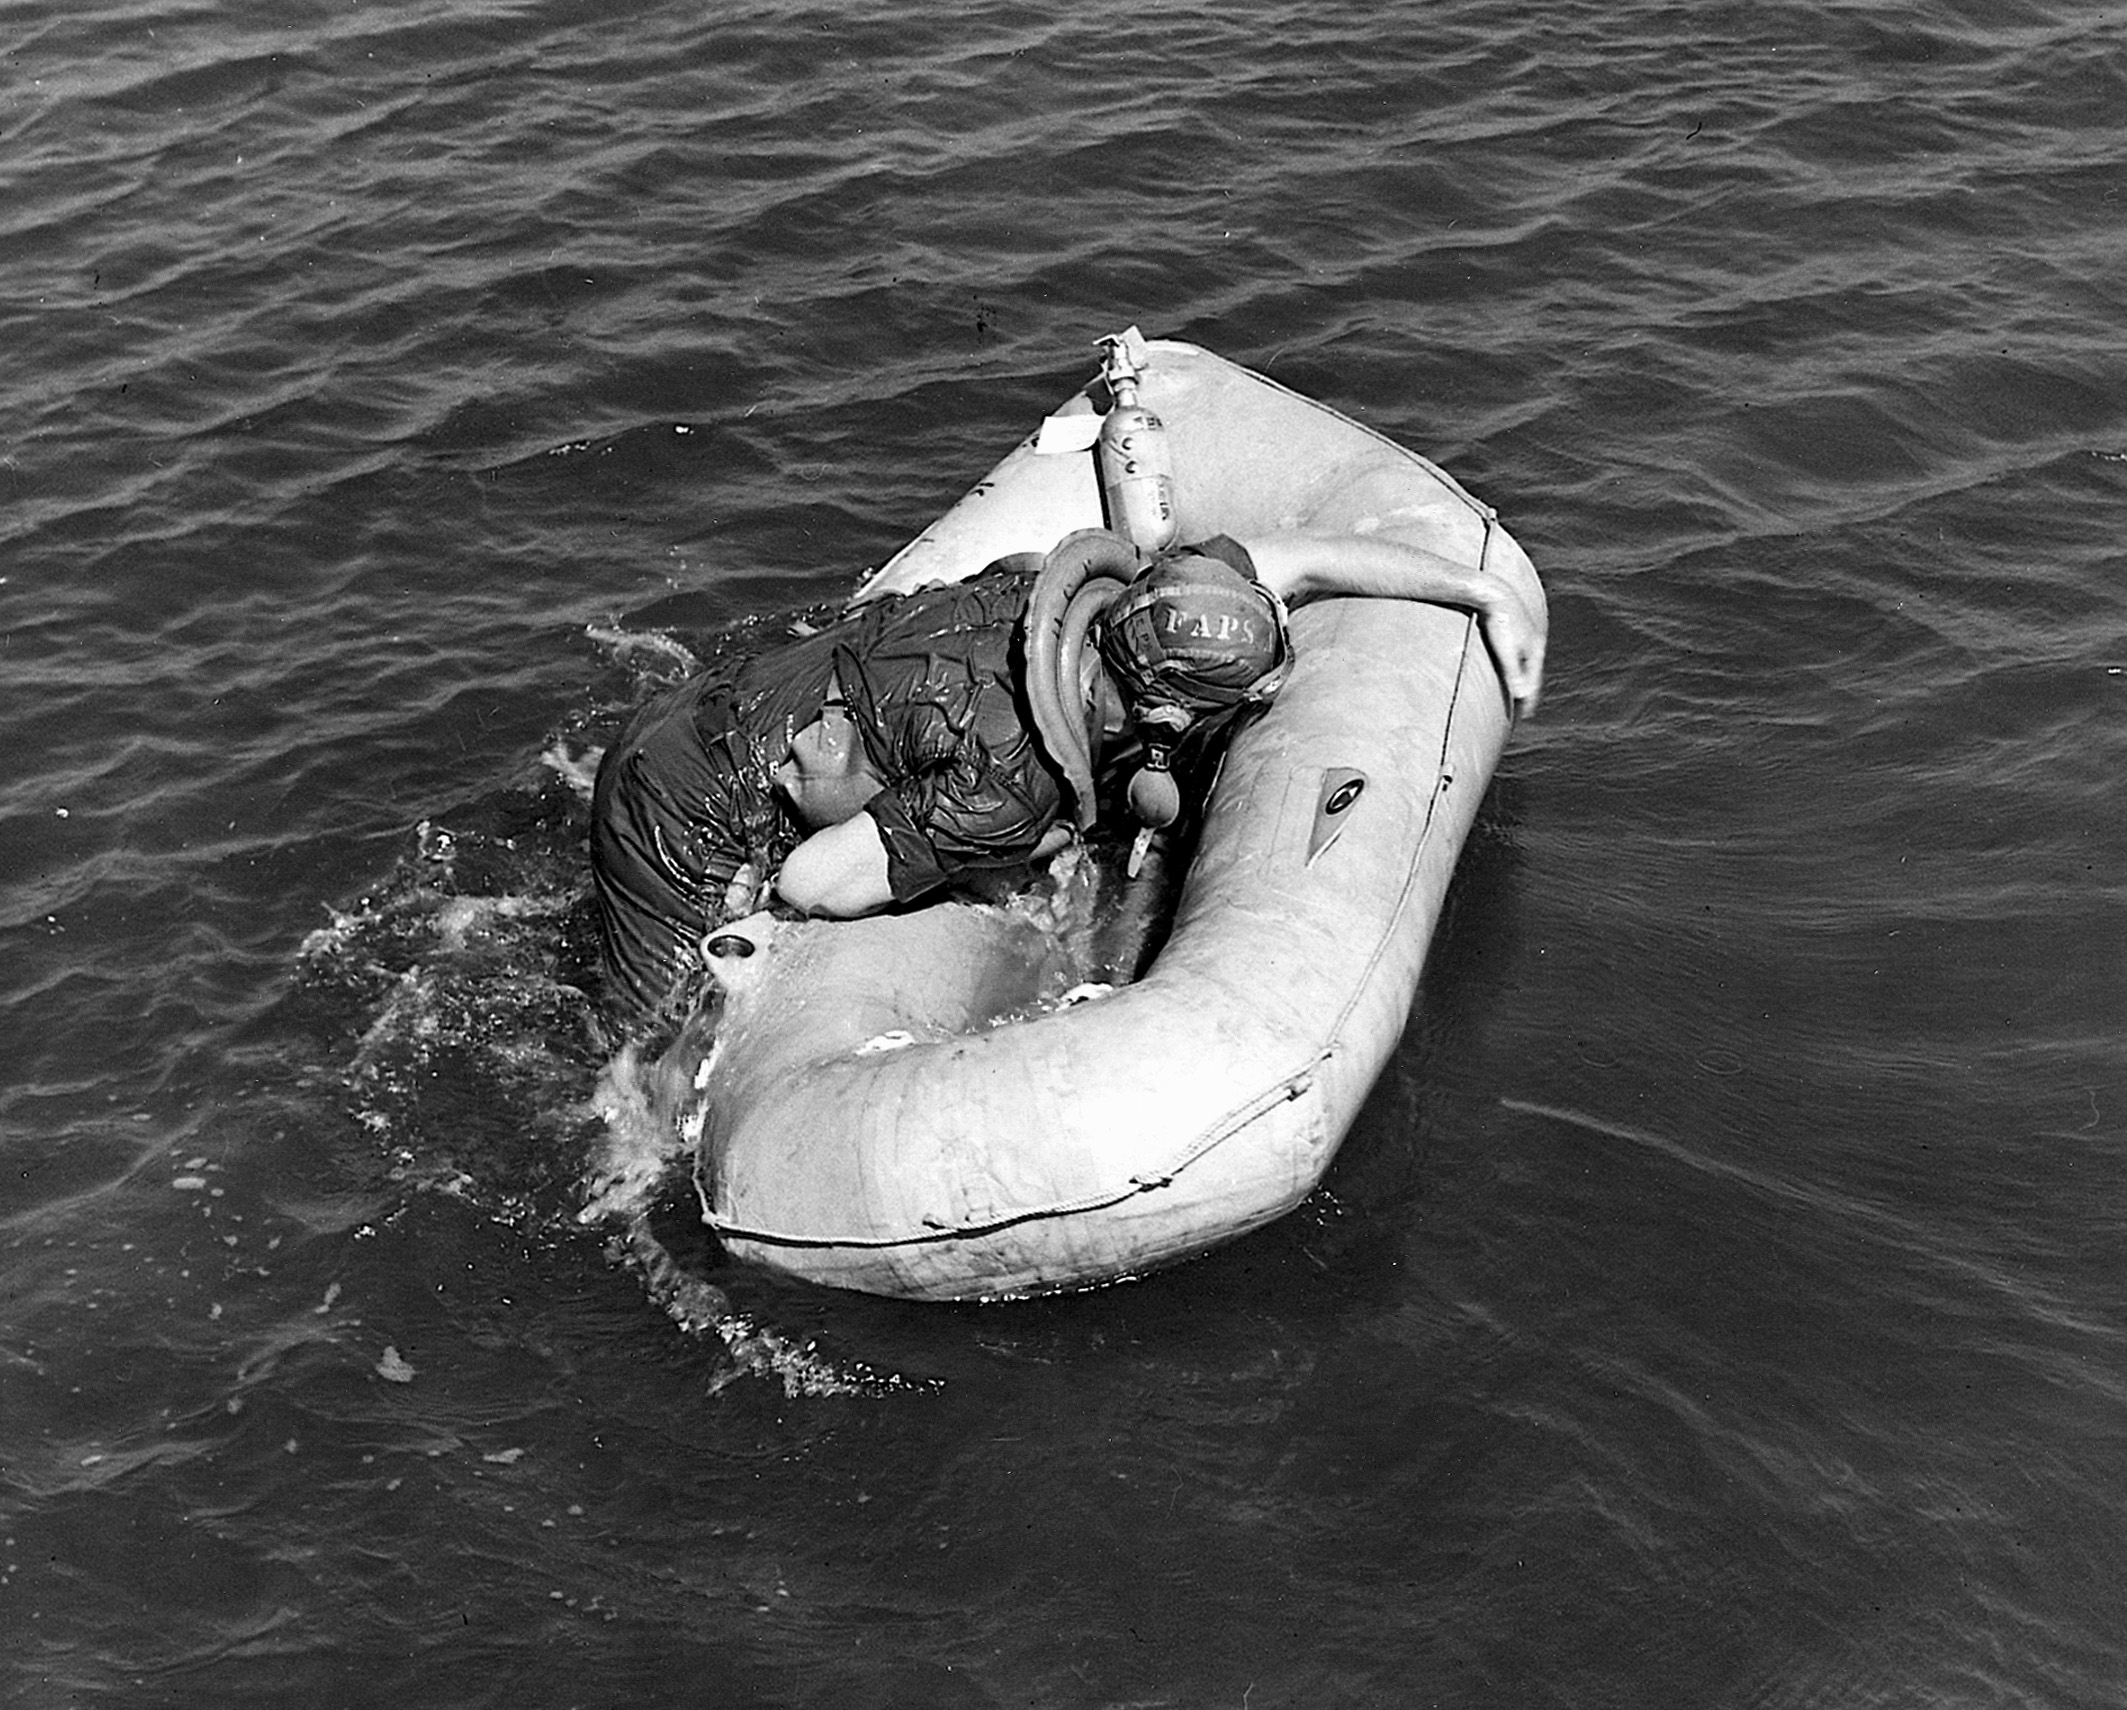 A Navy flier attempts the cumbersome task of boarding his one-man liferaft.